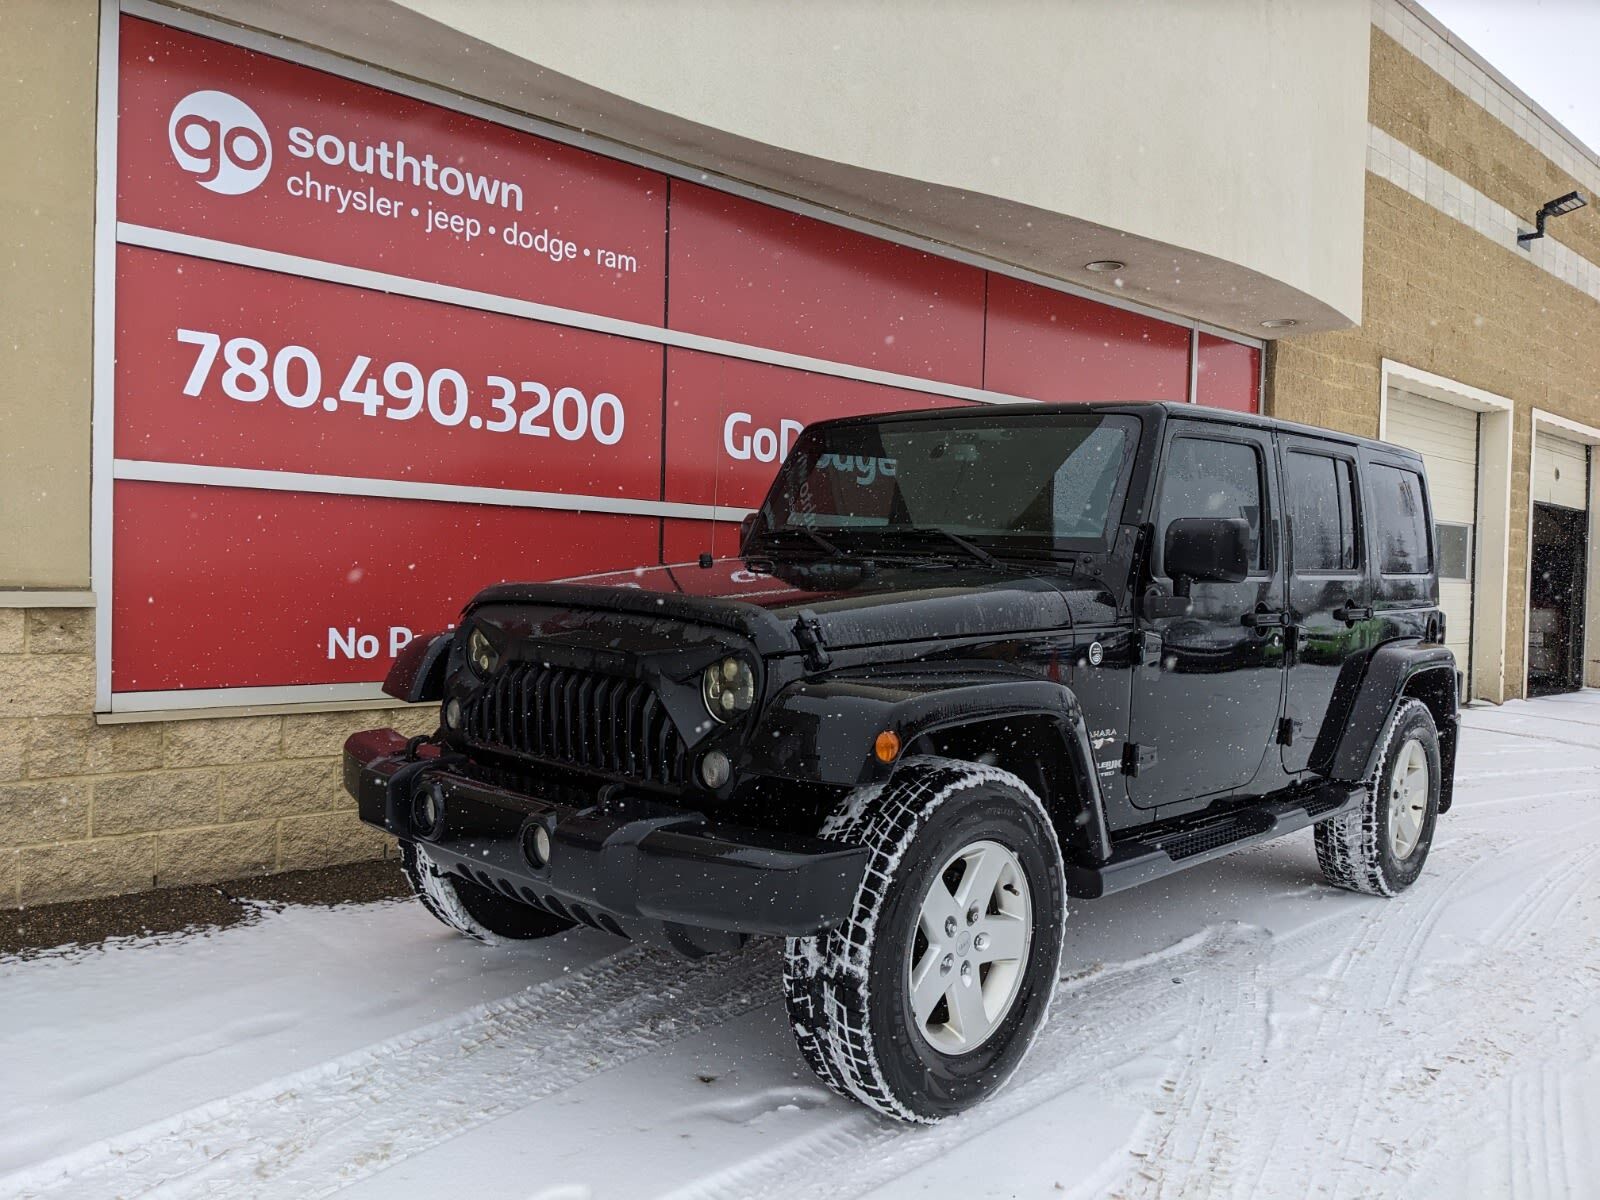 2018 Jeep Wrangler JK Unlimited UNLIMITED SAHARA IN BLACK EQUIPPED WITH A 3.6L V6 